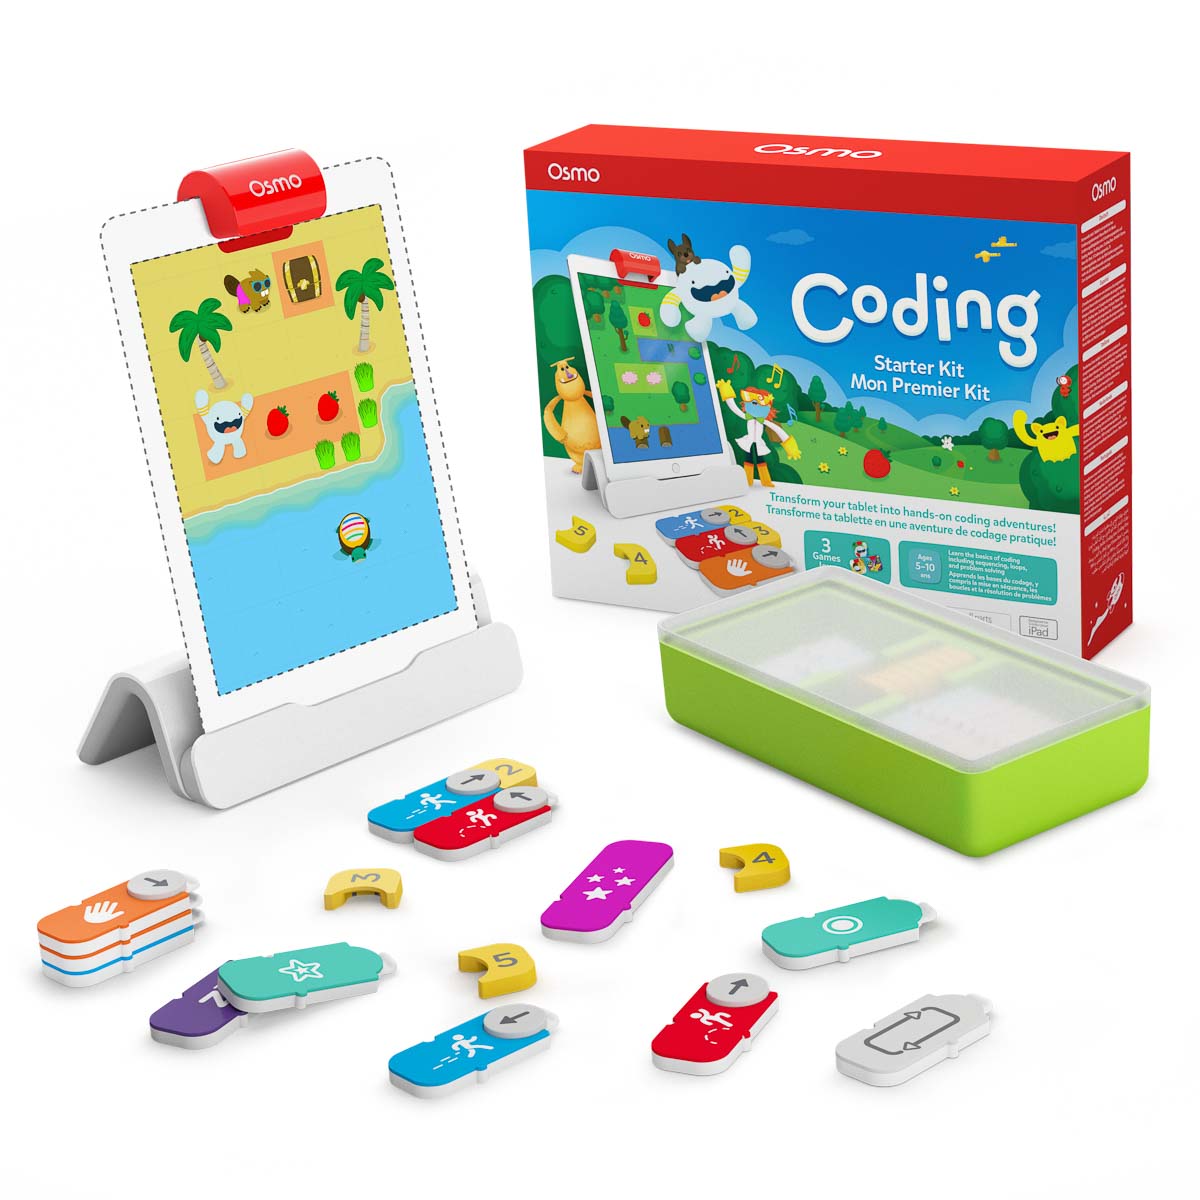 Featured image for “Osmo Coding Starter Kit (Version2021)”